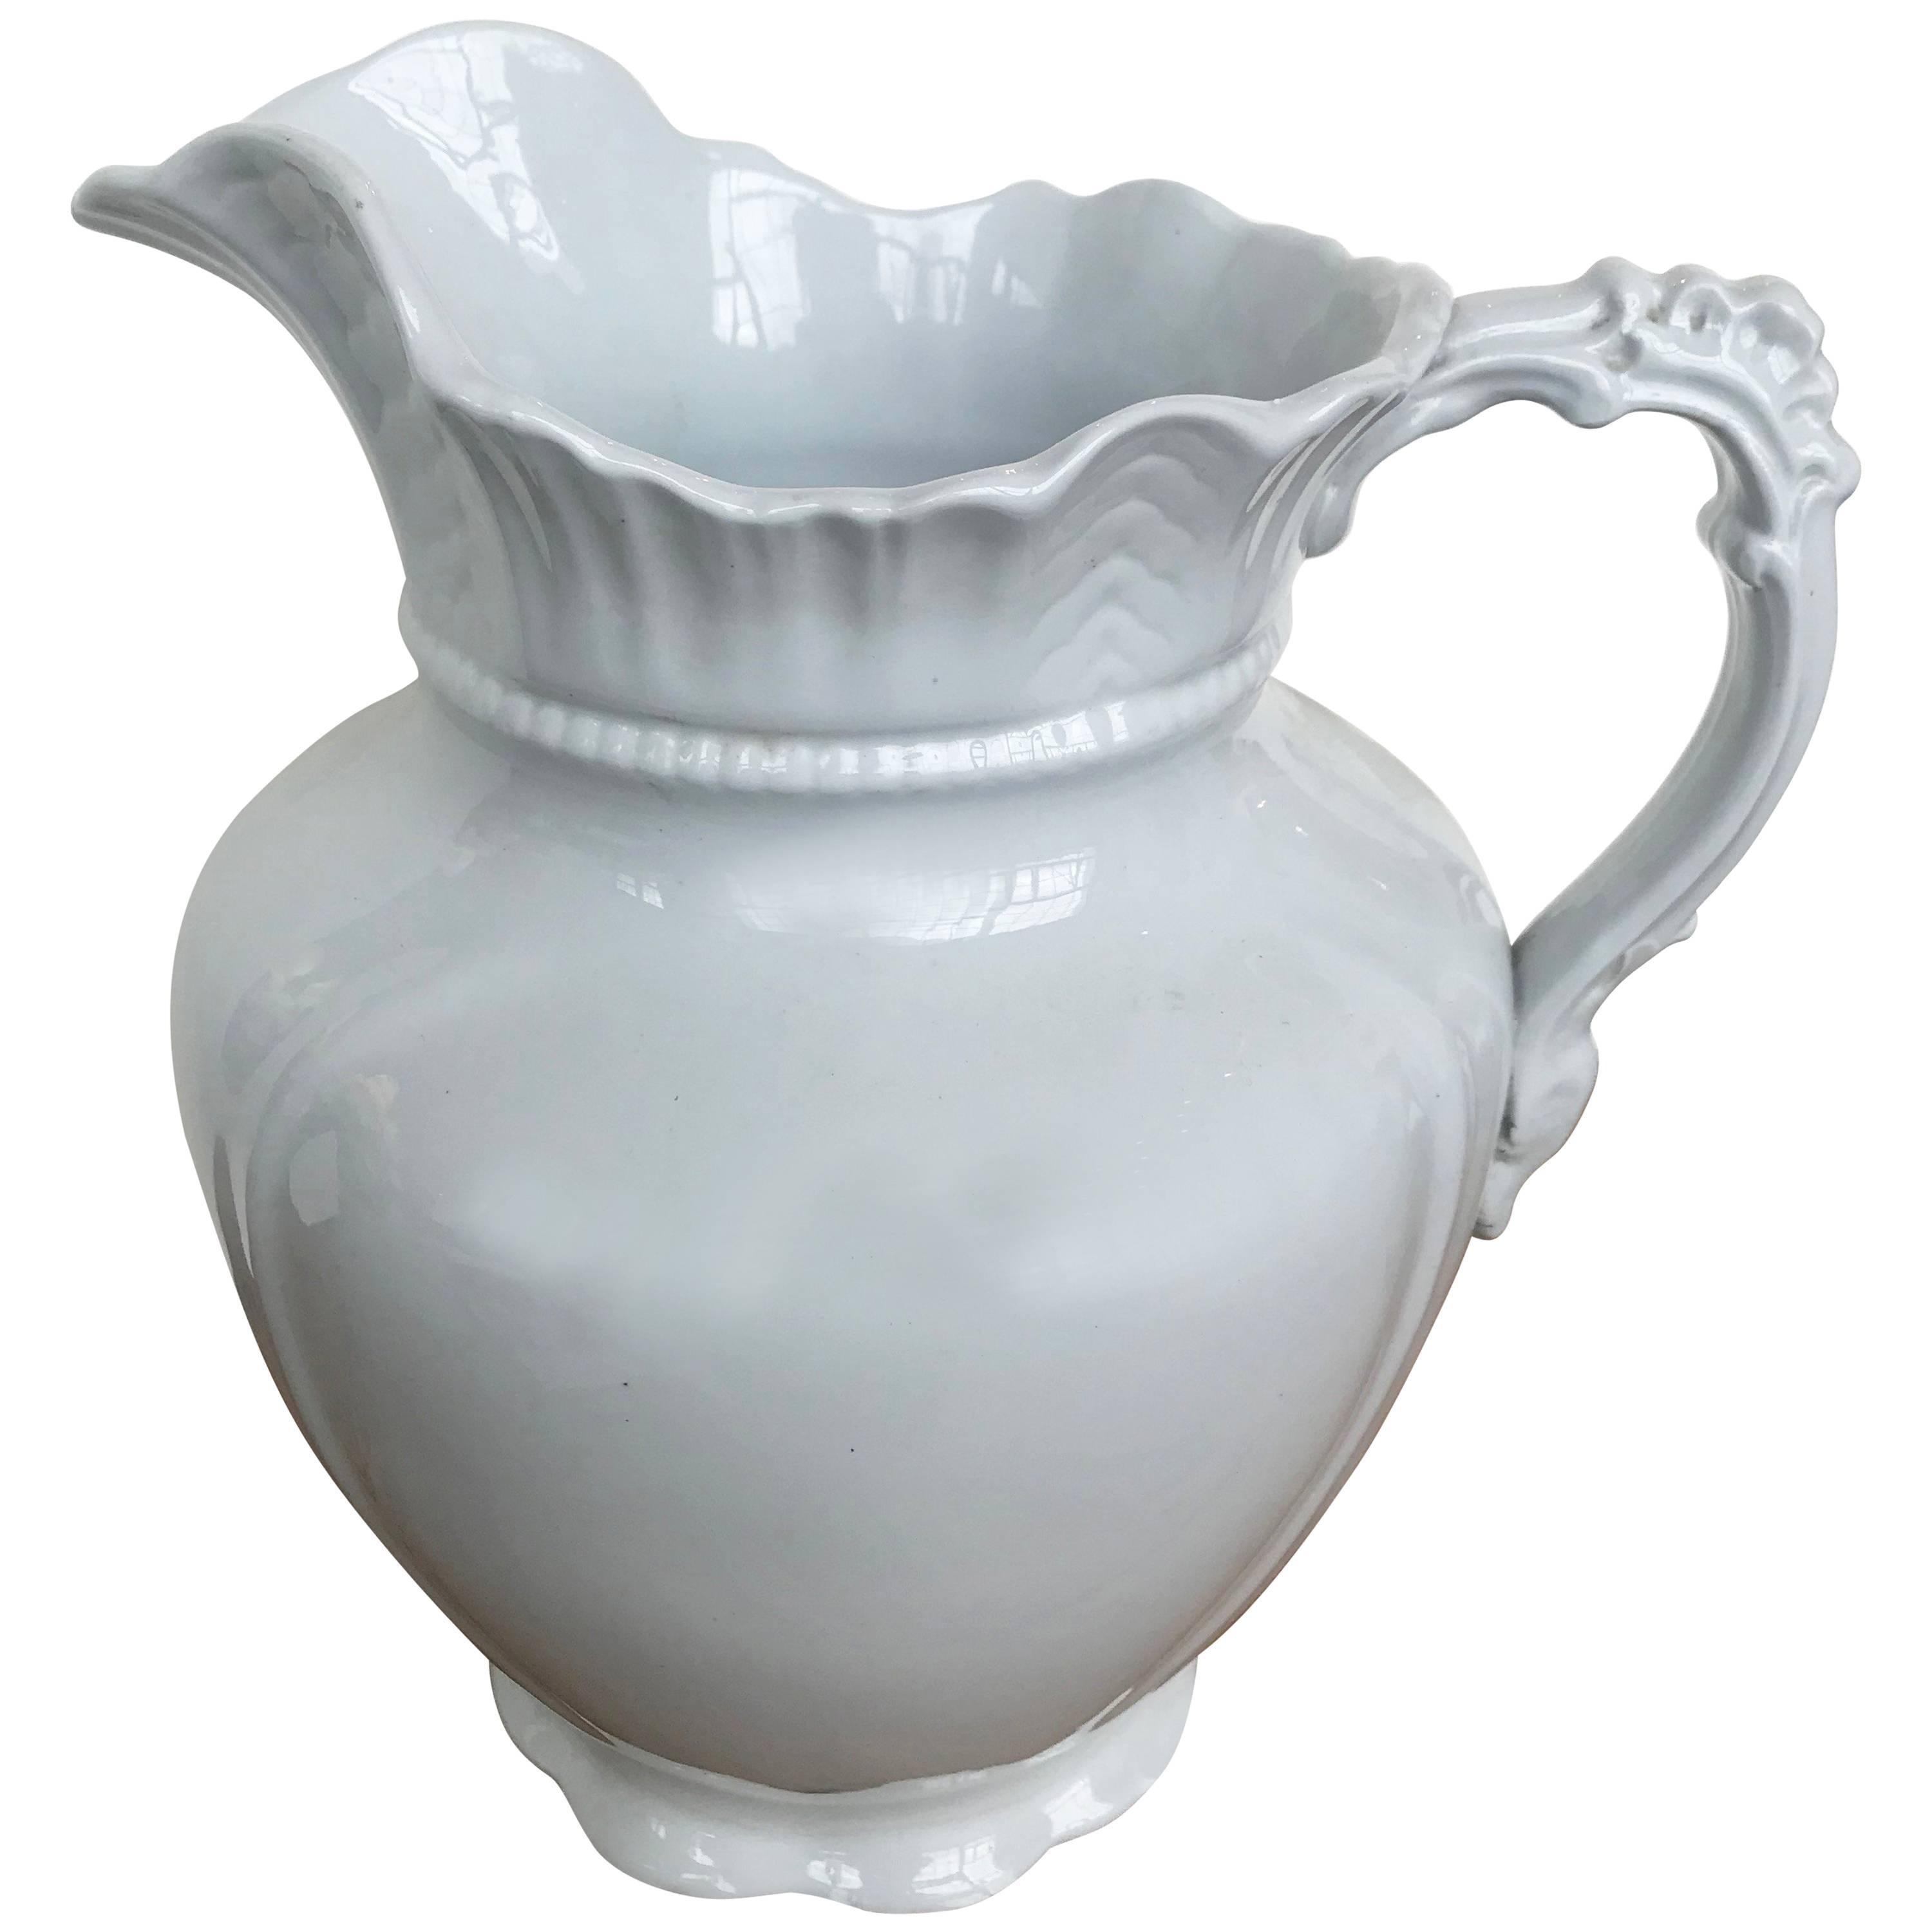 Ironstone Alfred Meakin Ltd. Pitcher For Sale